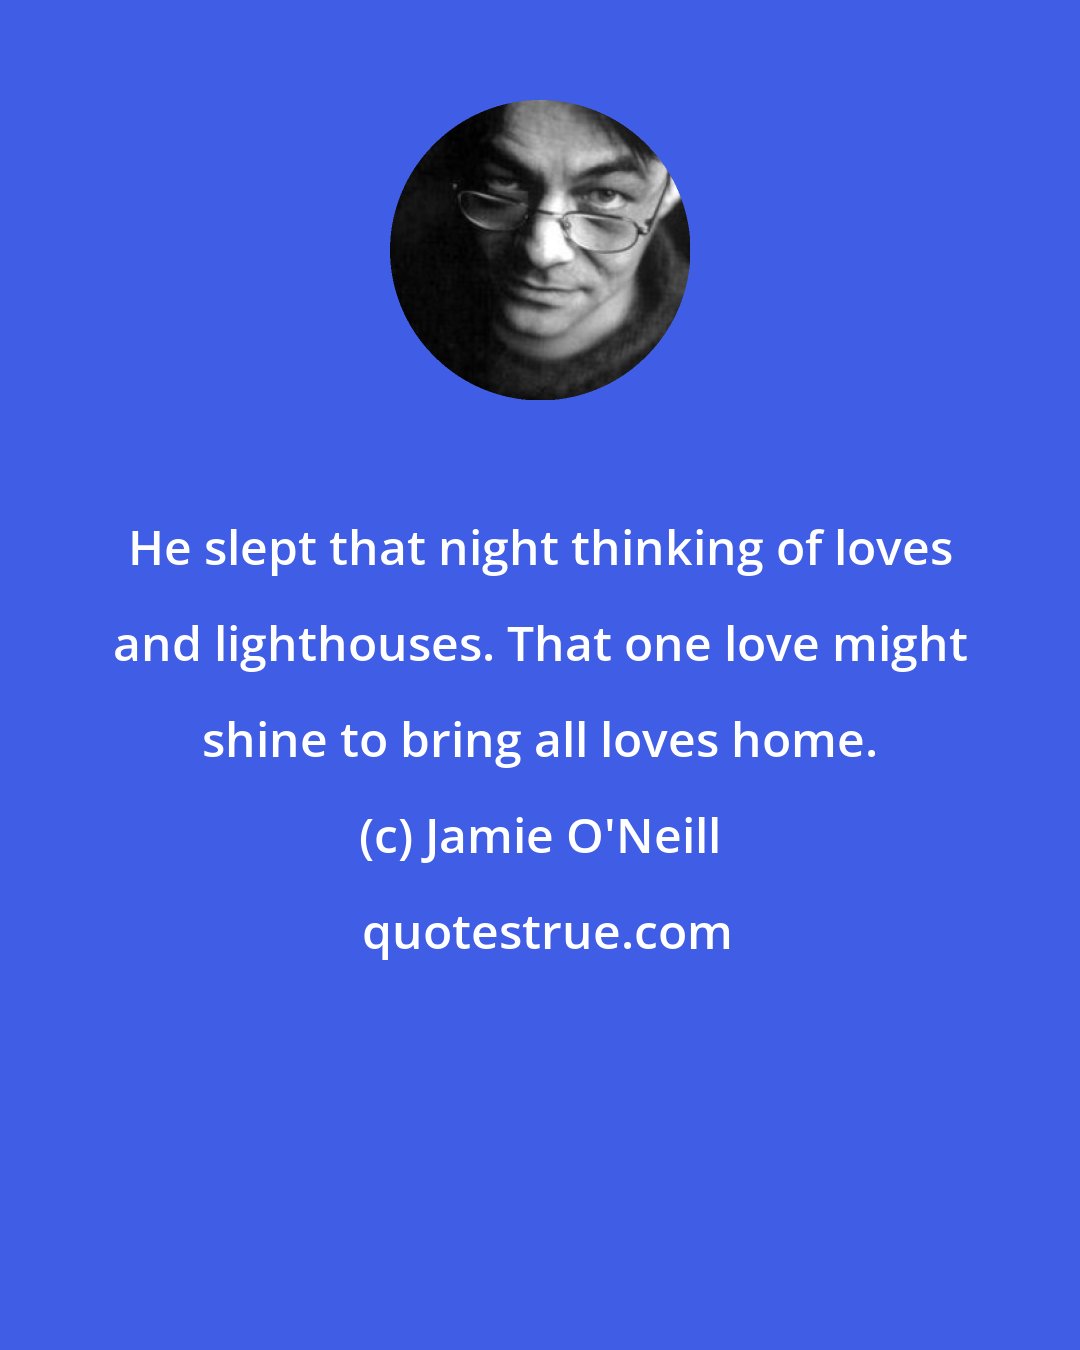 Jamie O'Neill: He slept that night thinking of loves and lighthouses. That one love might shine to bring all loves home.